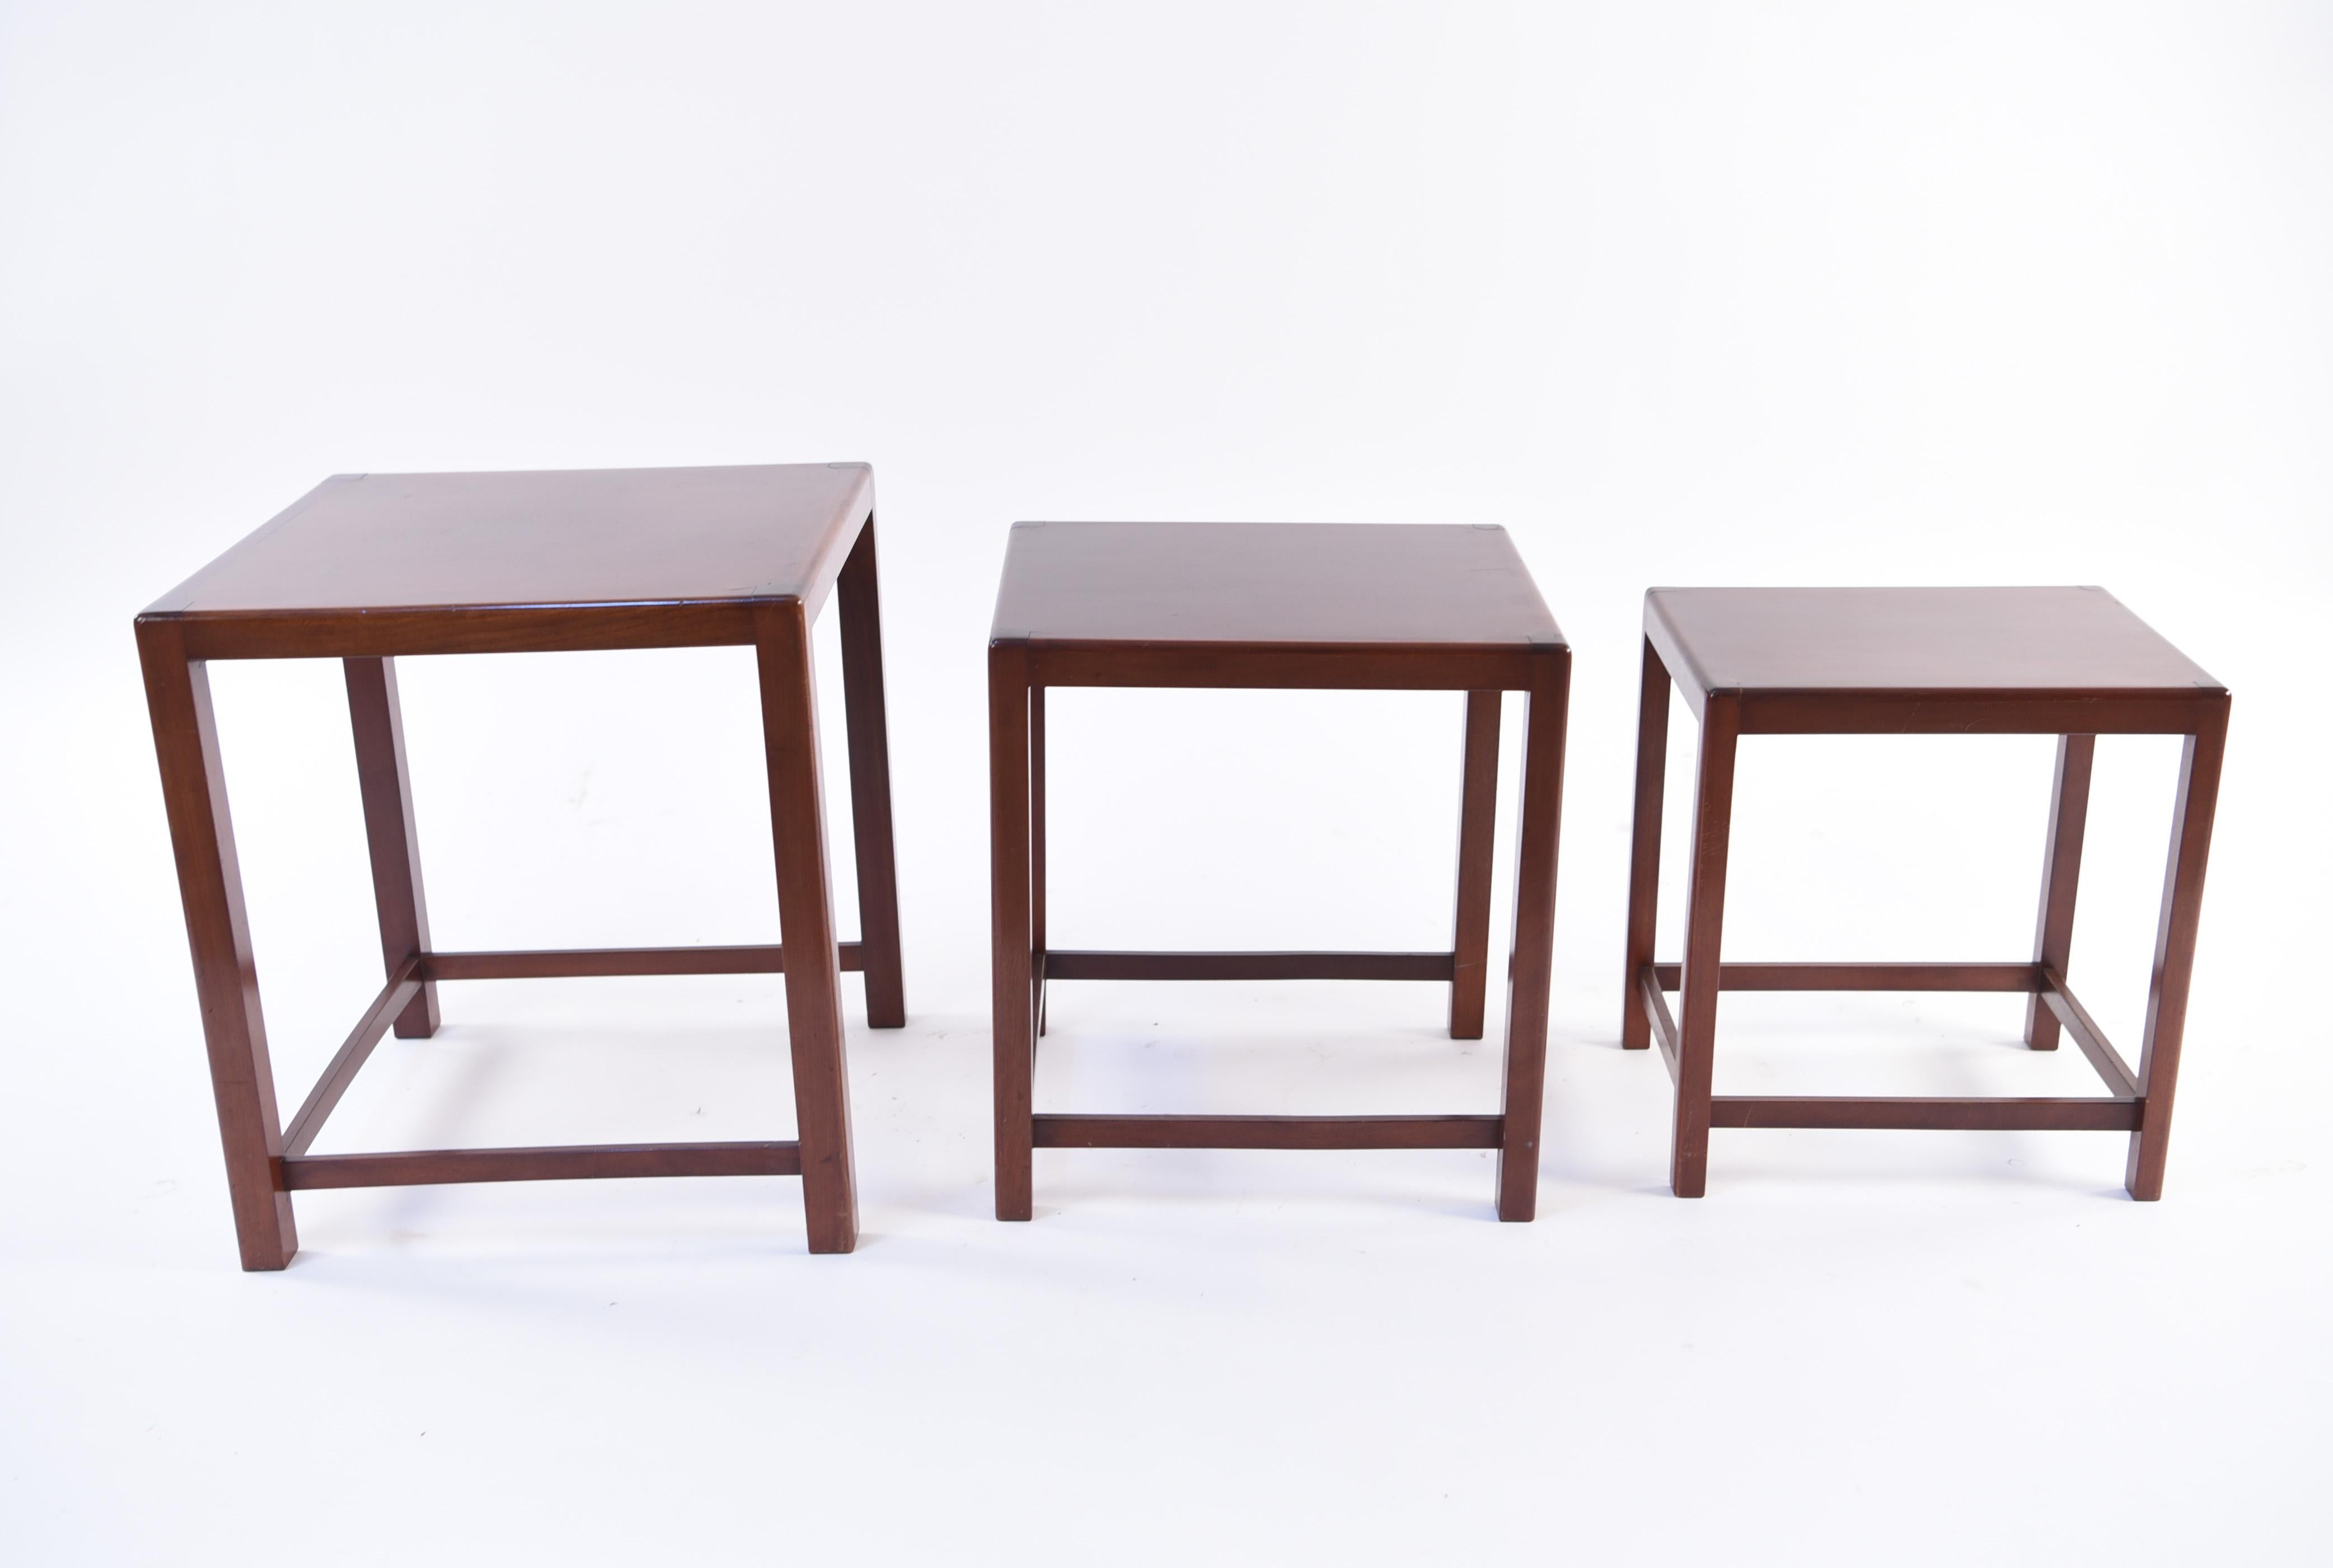 A set of three nesting tables in mahogany wood by Fritz Hansen, circa 1950s. This set has clean, Minimalist lines which gives it a pleasing, modern appearance. The tables nest well with a small footprint, yet can be used independently in an interior